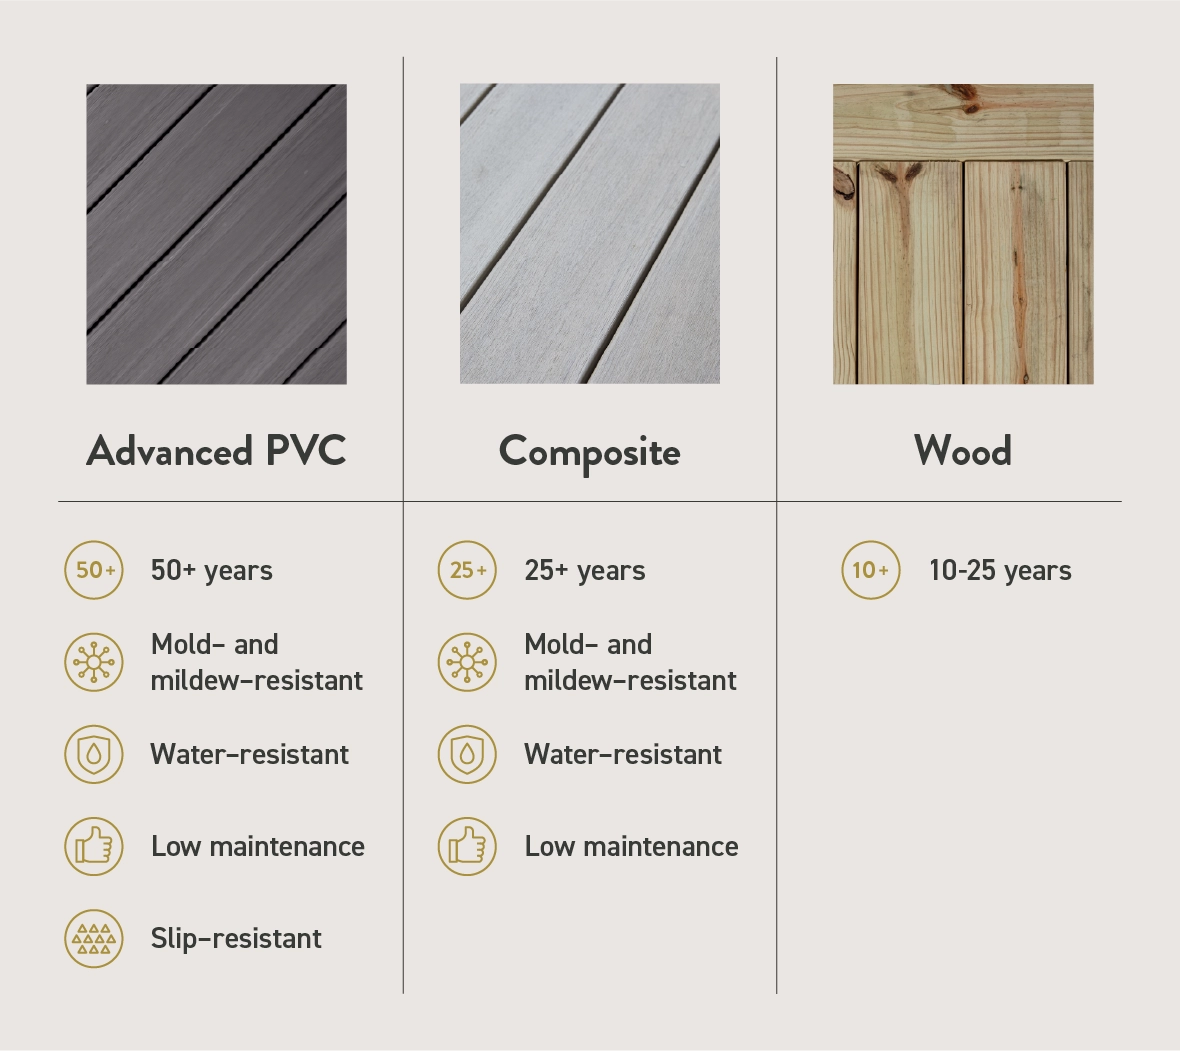 Photo comparisons with benefits of each decking material, including average lifespan, mold and mildew resistance, and more.